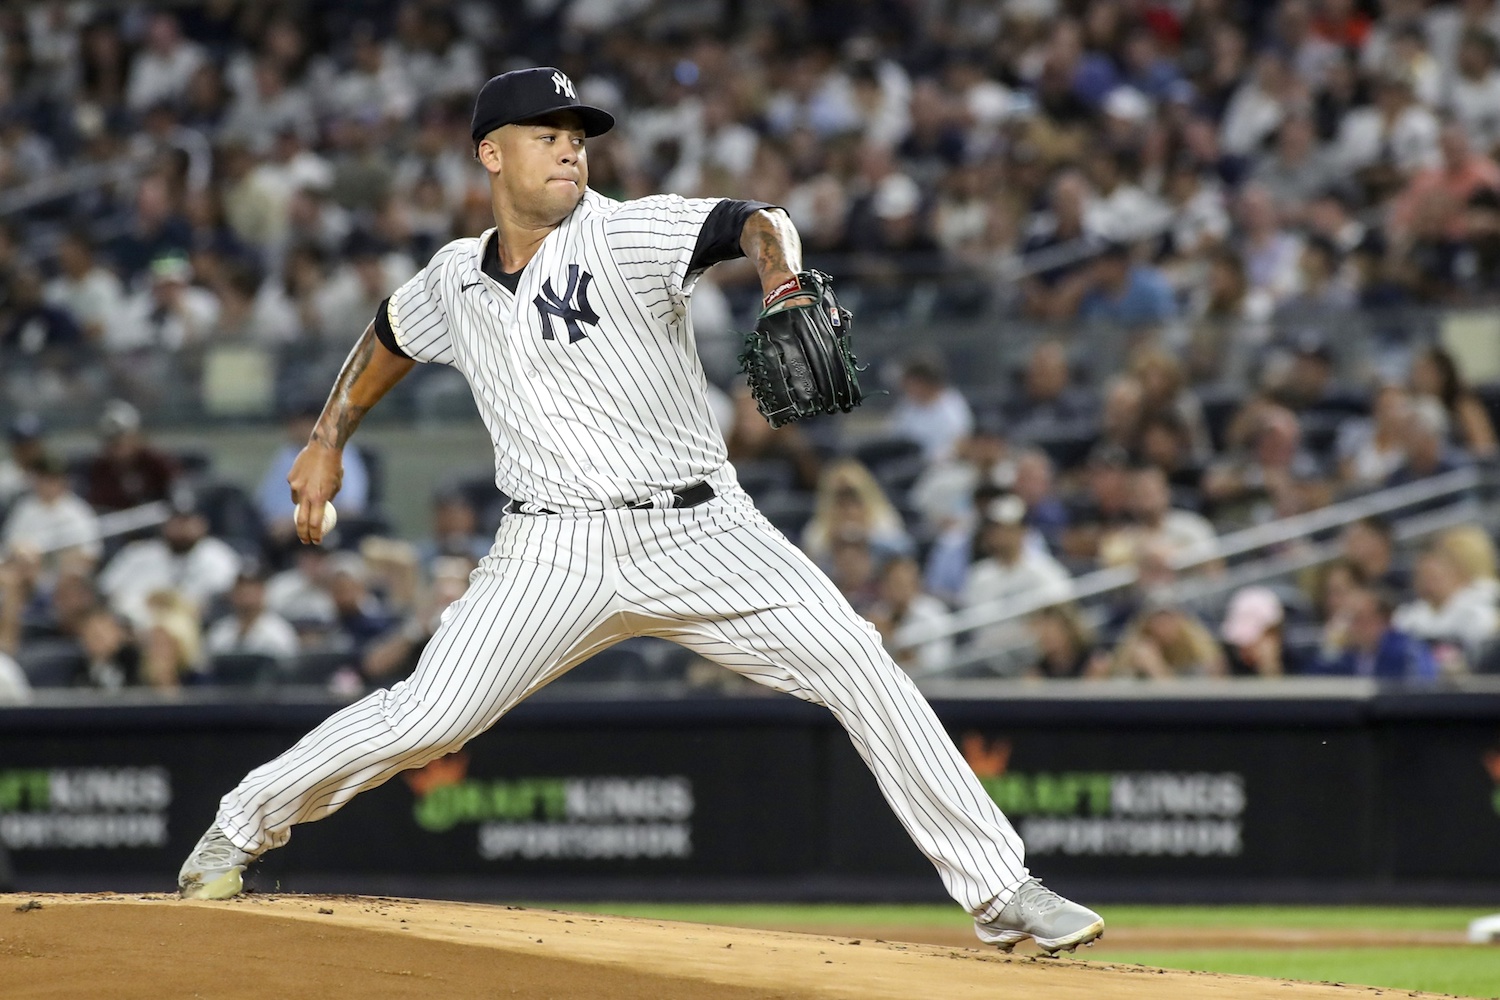 Sep 9, 2022; Bronx, New York, USA; New York Yankees starting pitcher Frankie Montas (47) pitches in the first inning against the Tampa Bay Rays at Yankee Stadium. Mandatory Credit: Wendell Cruz-USA TODAY Sports